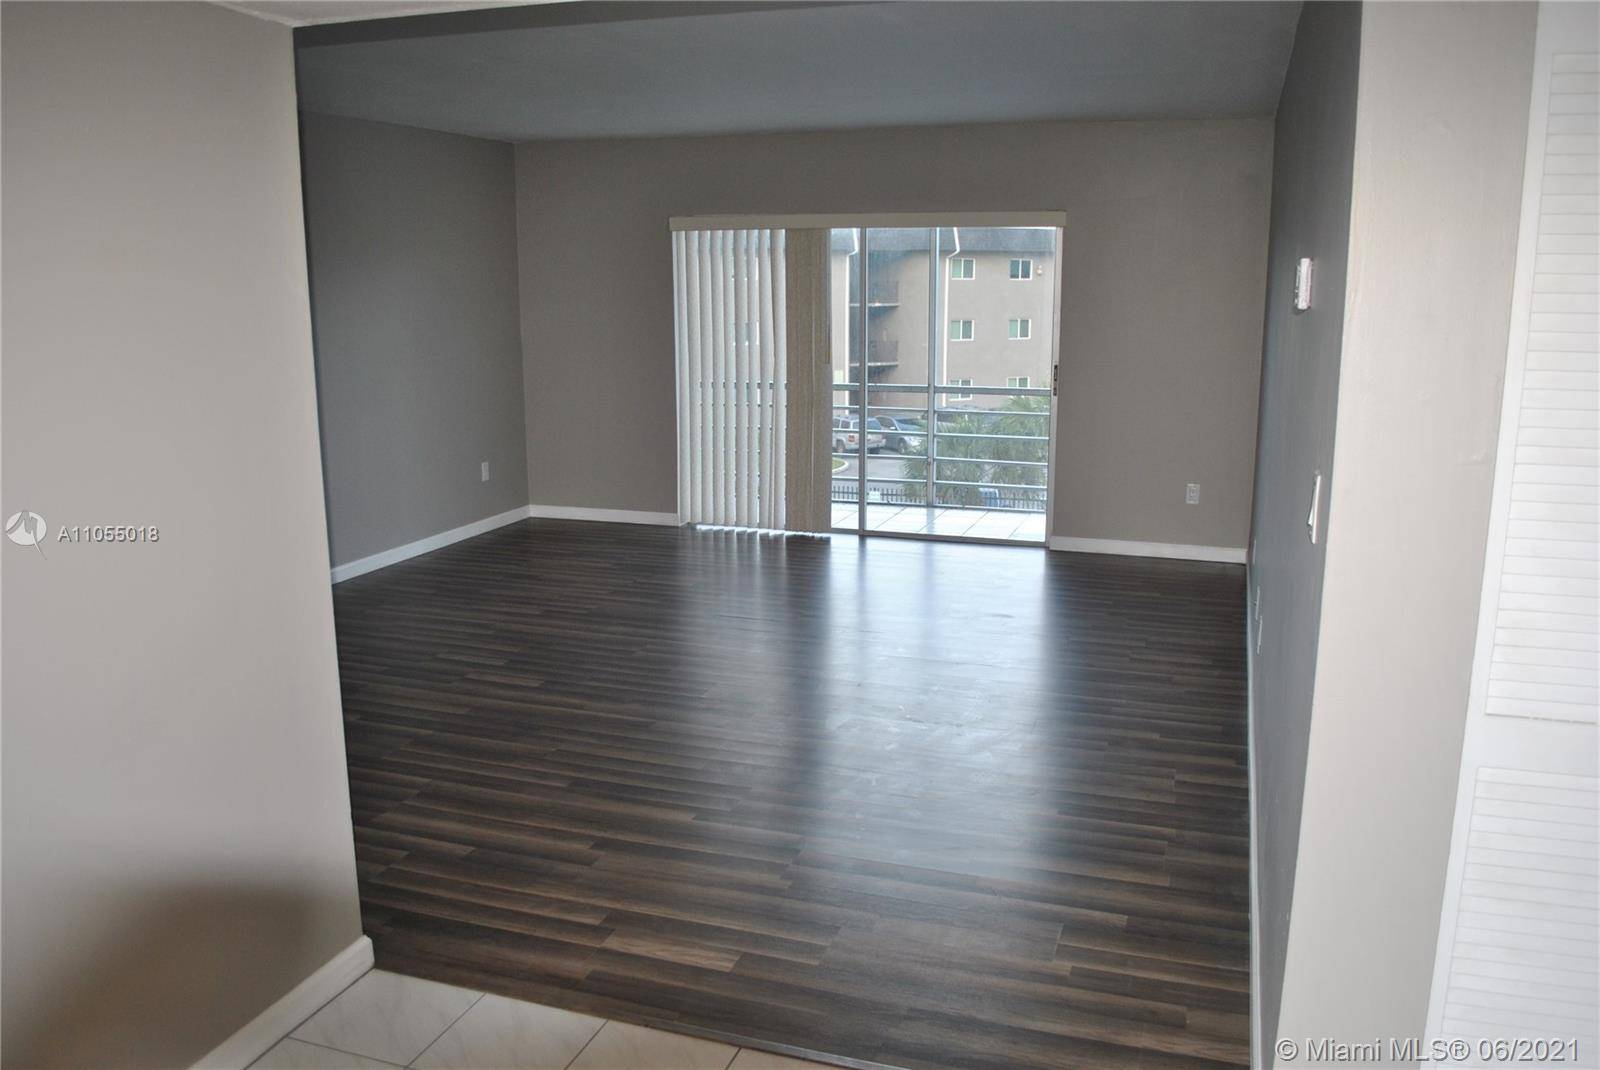 Totally remodeled large 2 bedroom 2 bath unit with the finest fixtures and finishes.